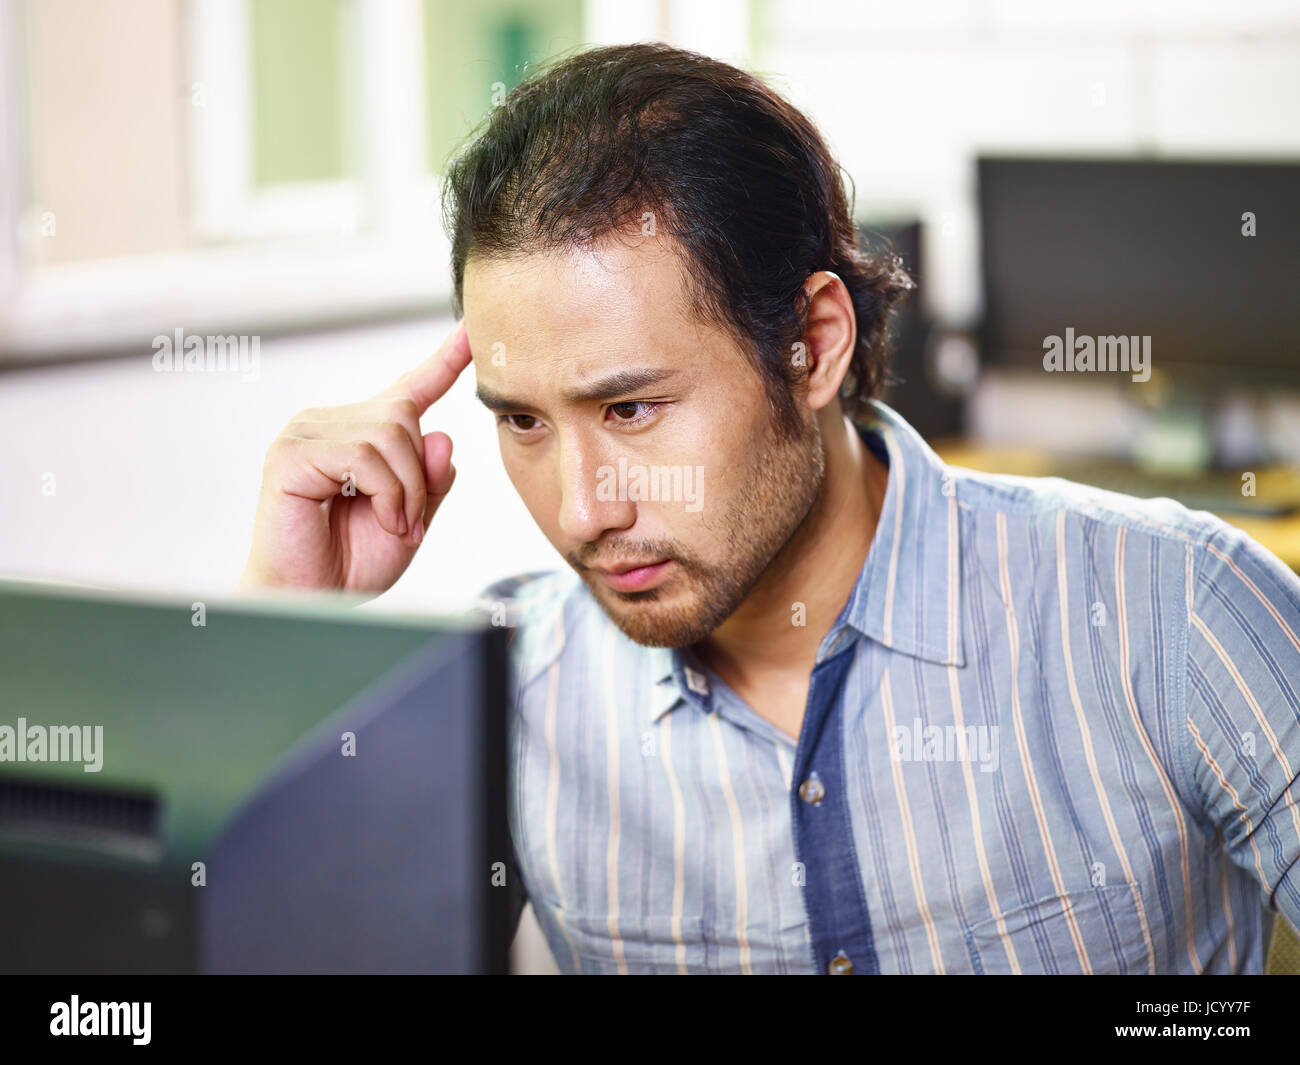 asian businessman working in office using computer thinking hard. Stock Photo